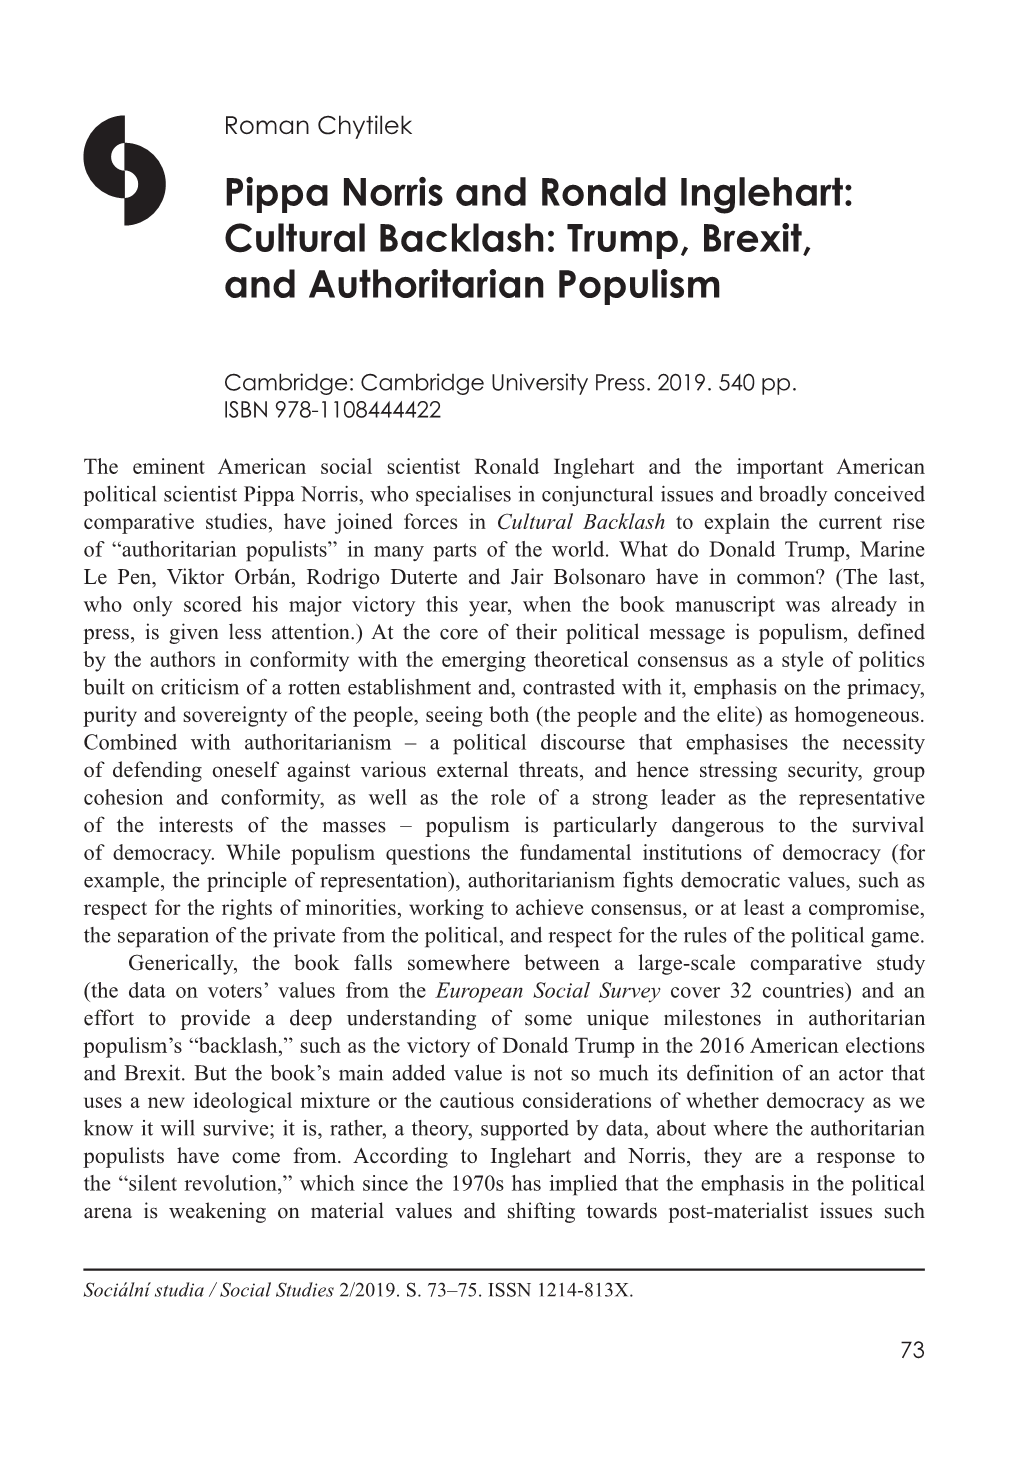 Pippa Norris and Ronald Inglehart: Cultural Backlash: Trump, Brexit, and Authoritarian Populism